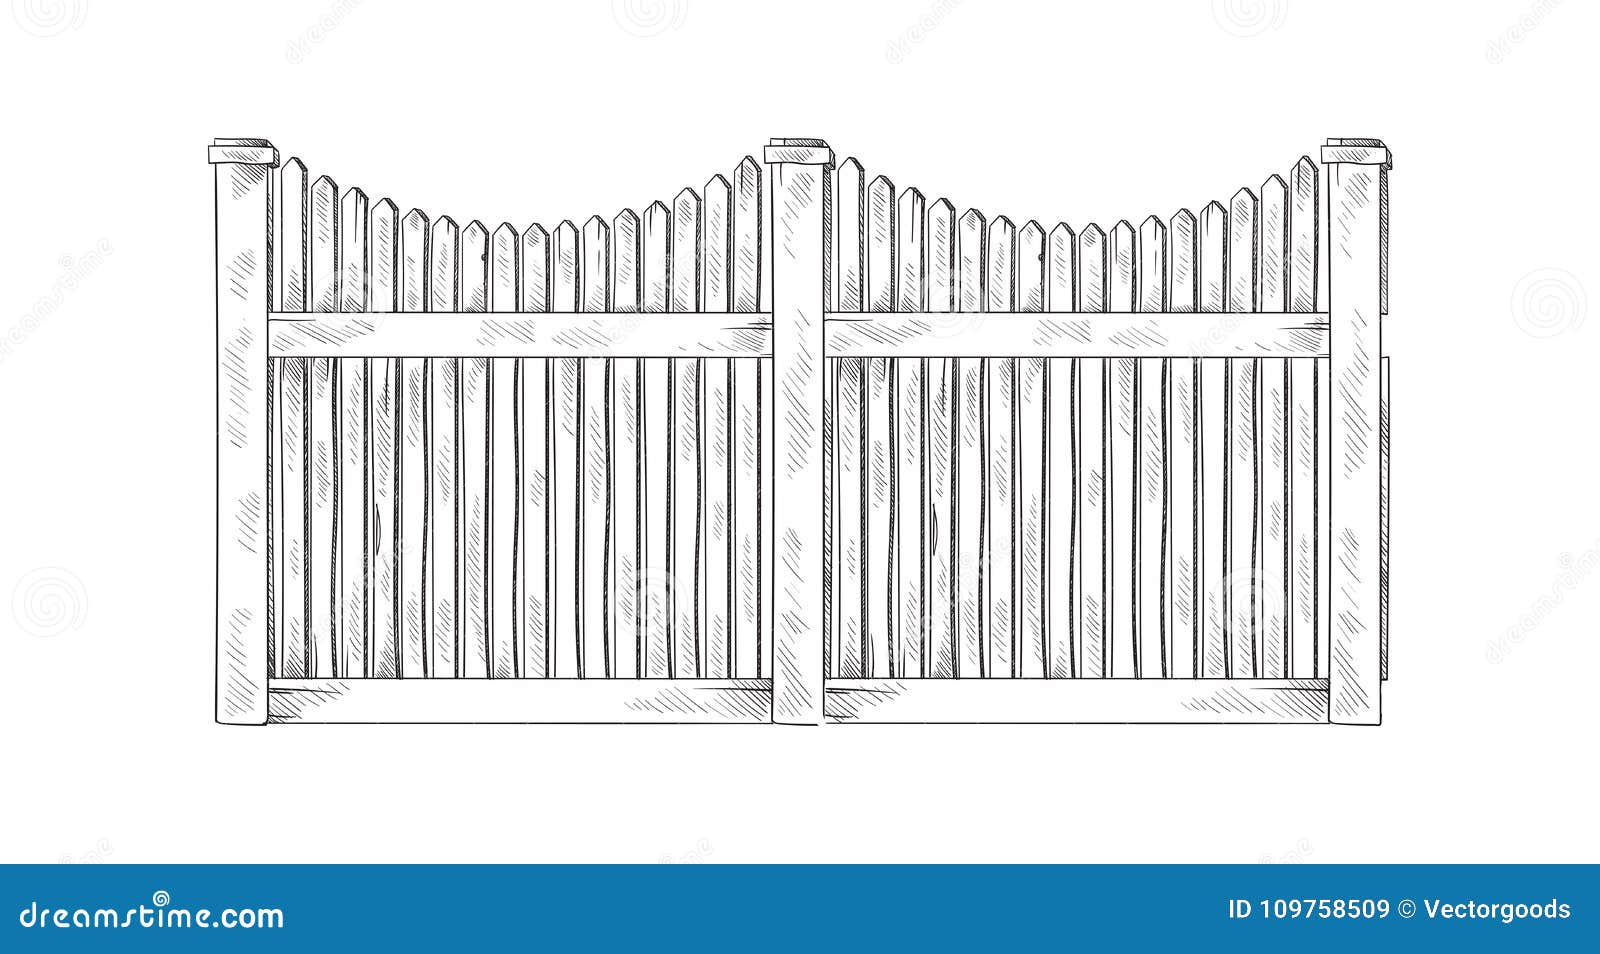 Wooden sketch fence stock vector. Illustration of fence